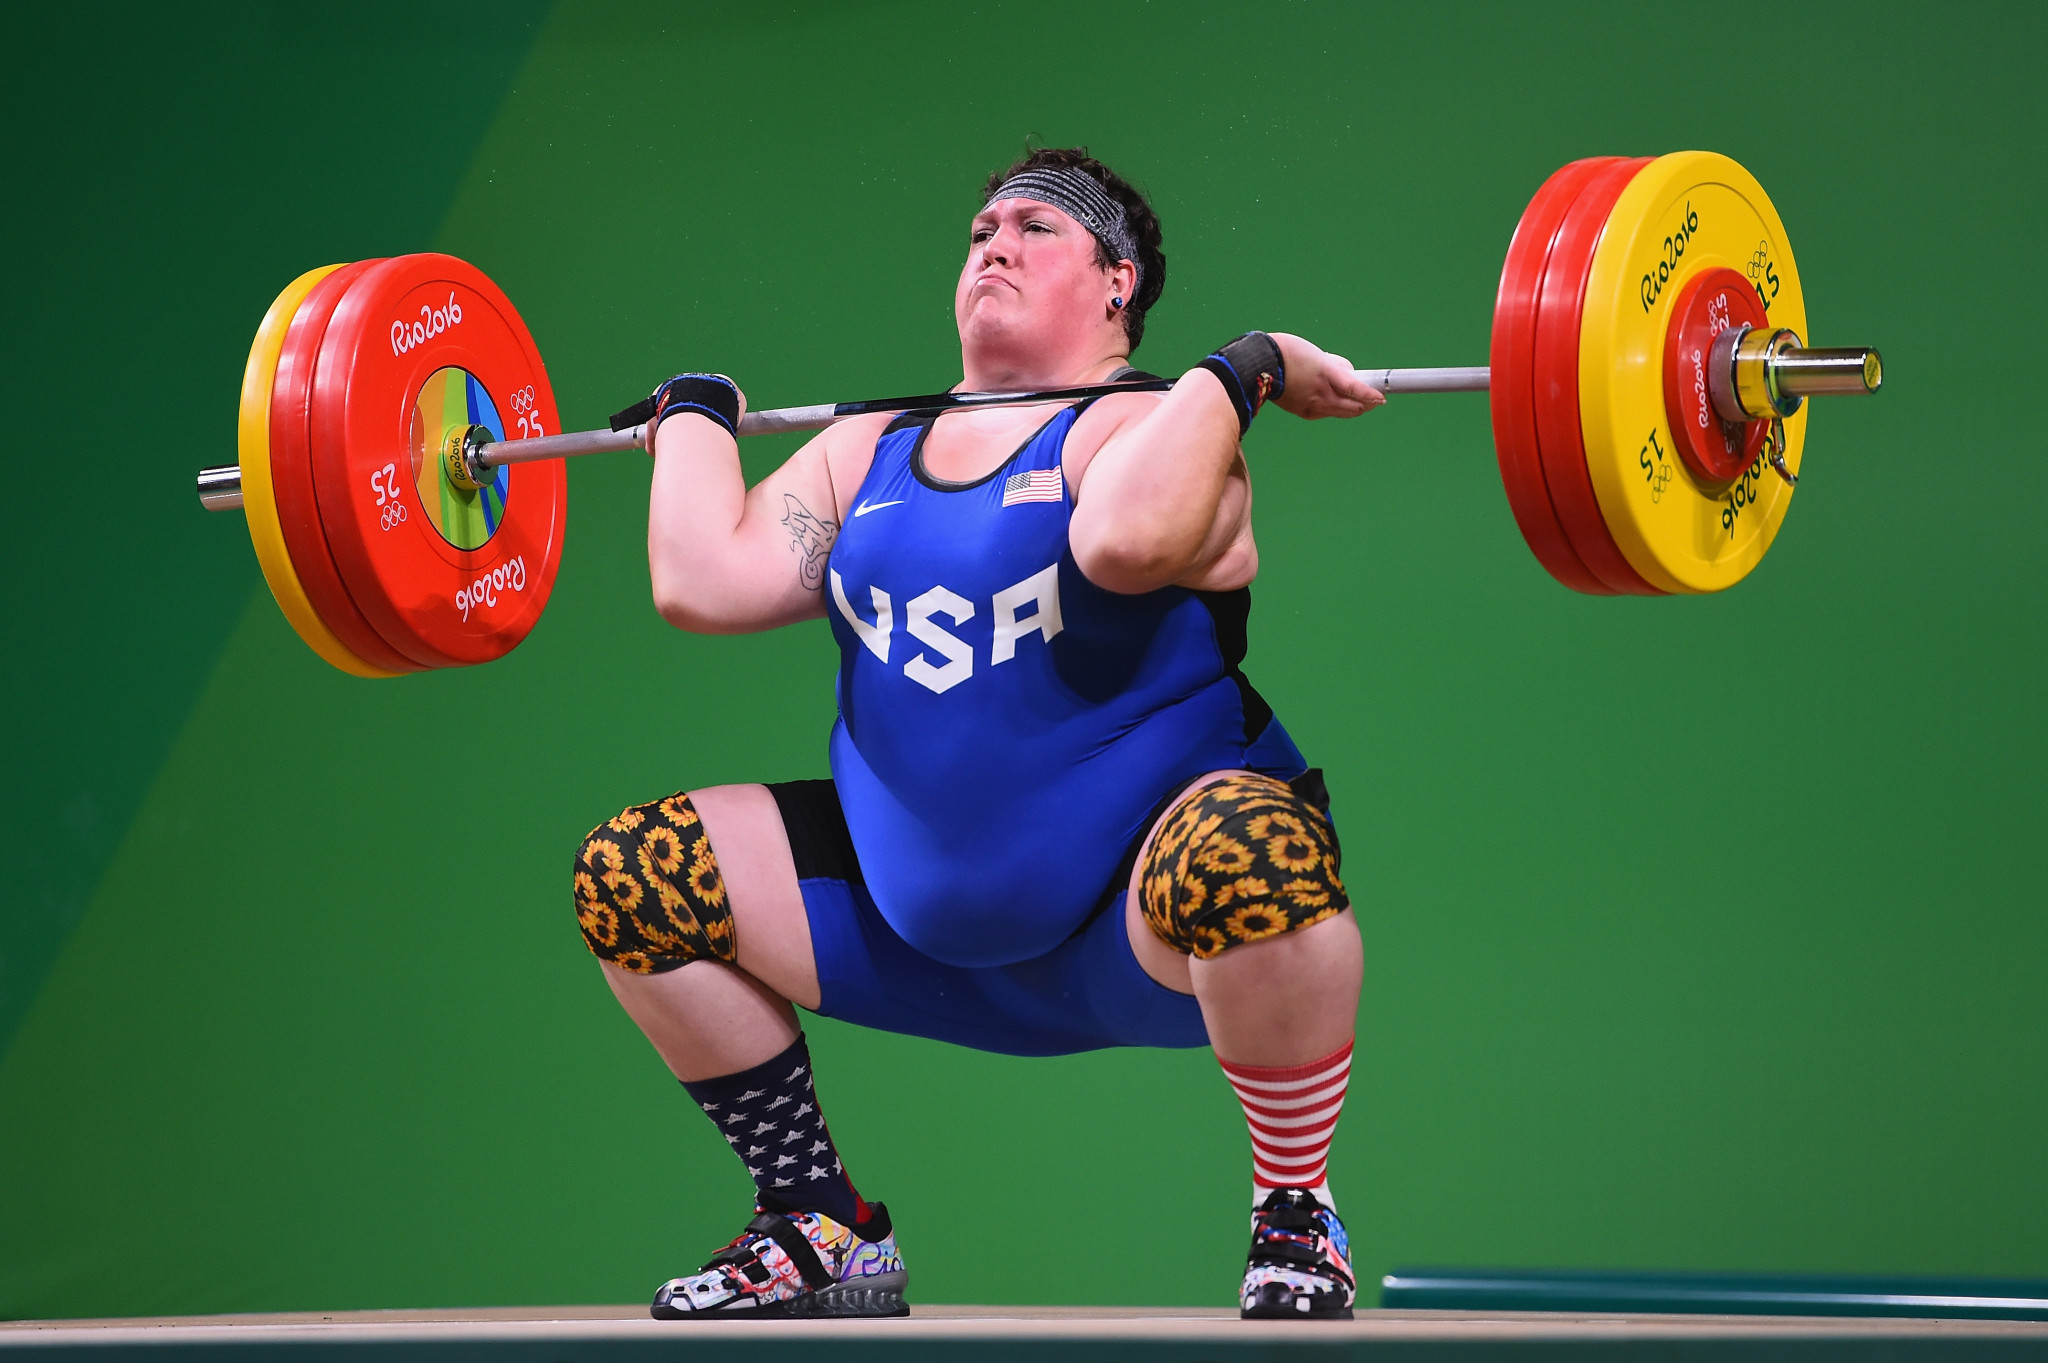 Robles claims three gold medals on final day at Pan American Weightlifting Championships